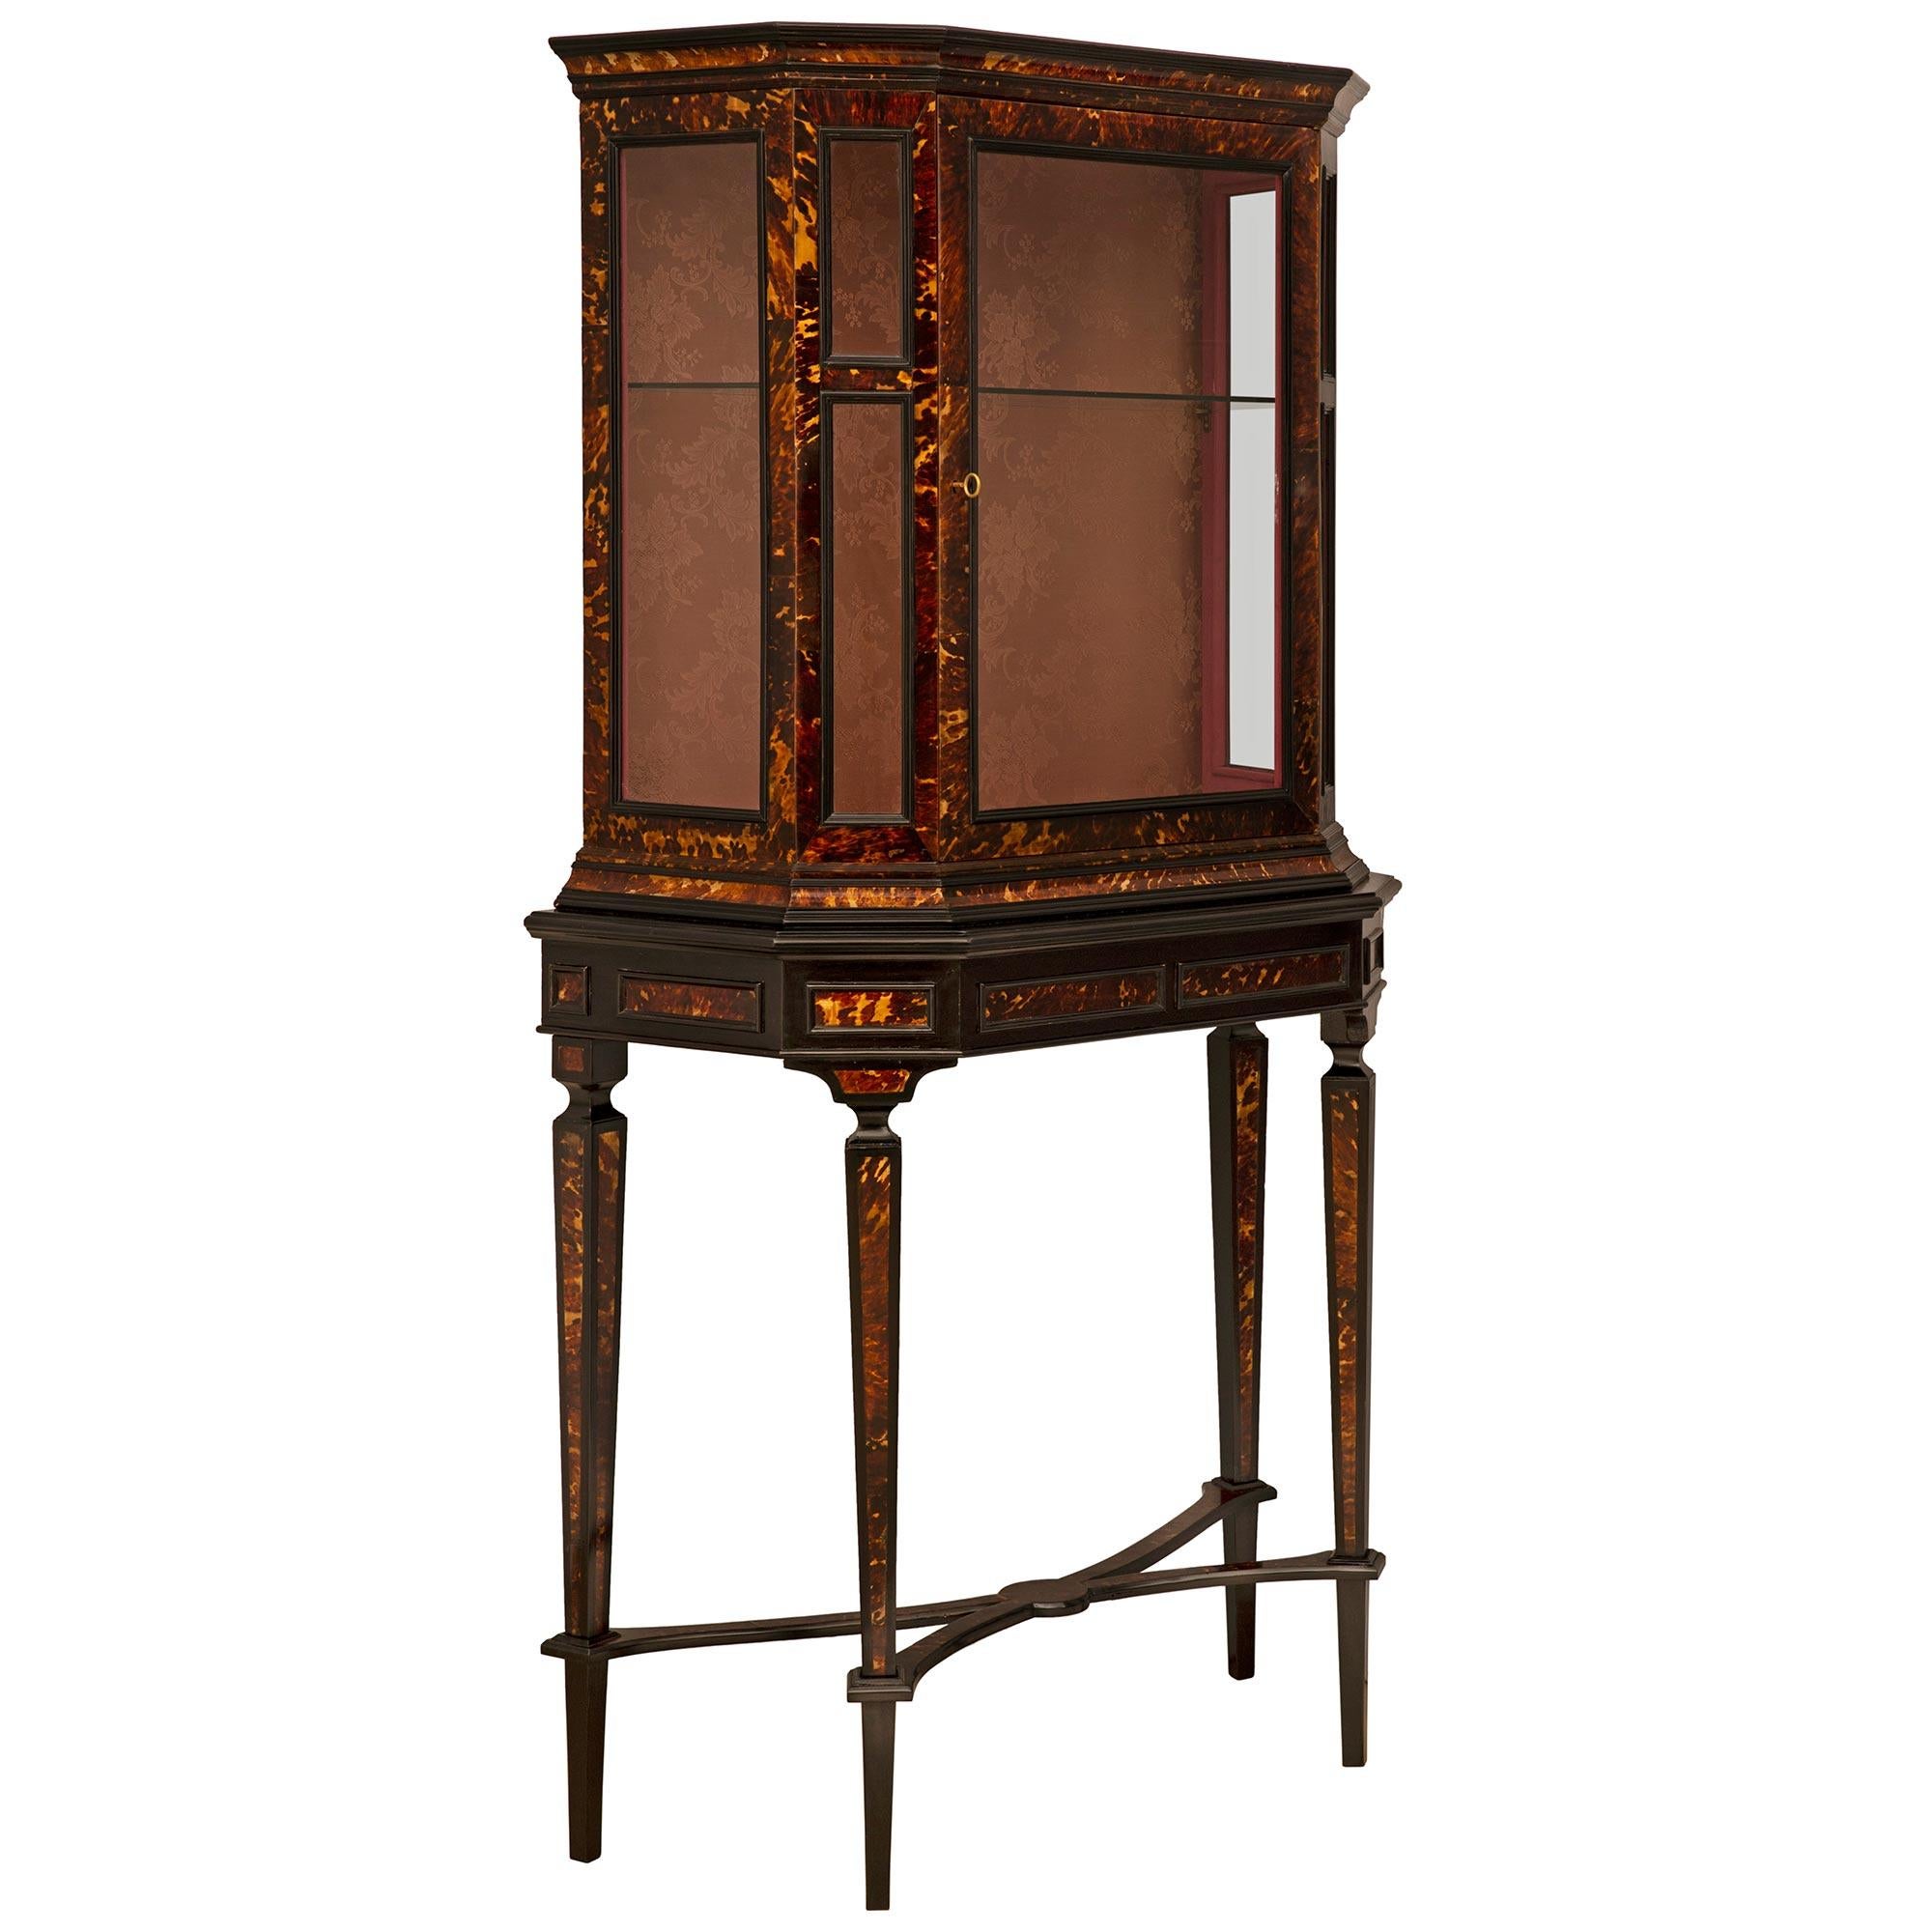 Unknown Continental 19th Century Ebonized Fruitwood And Tortoiseshell Cabinet Vitrine For Sale